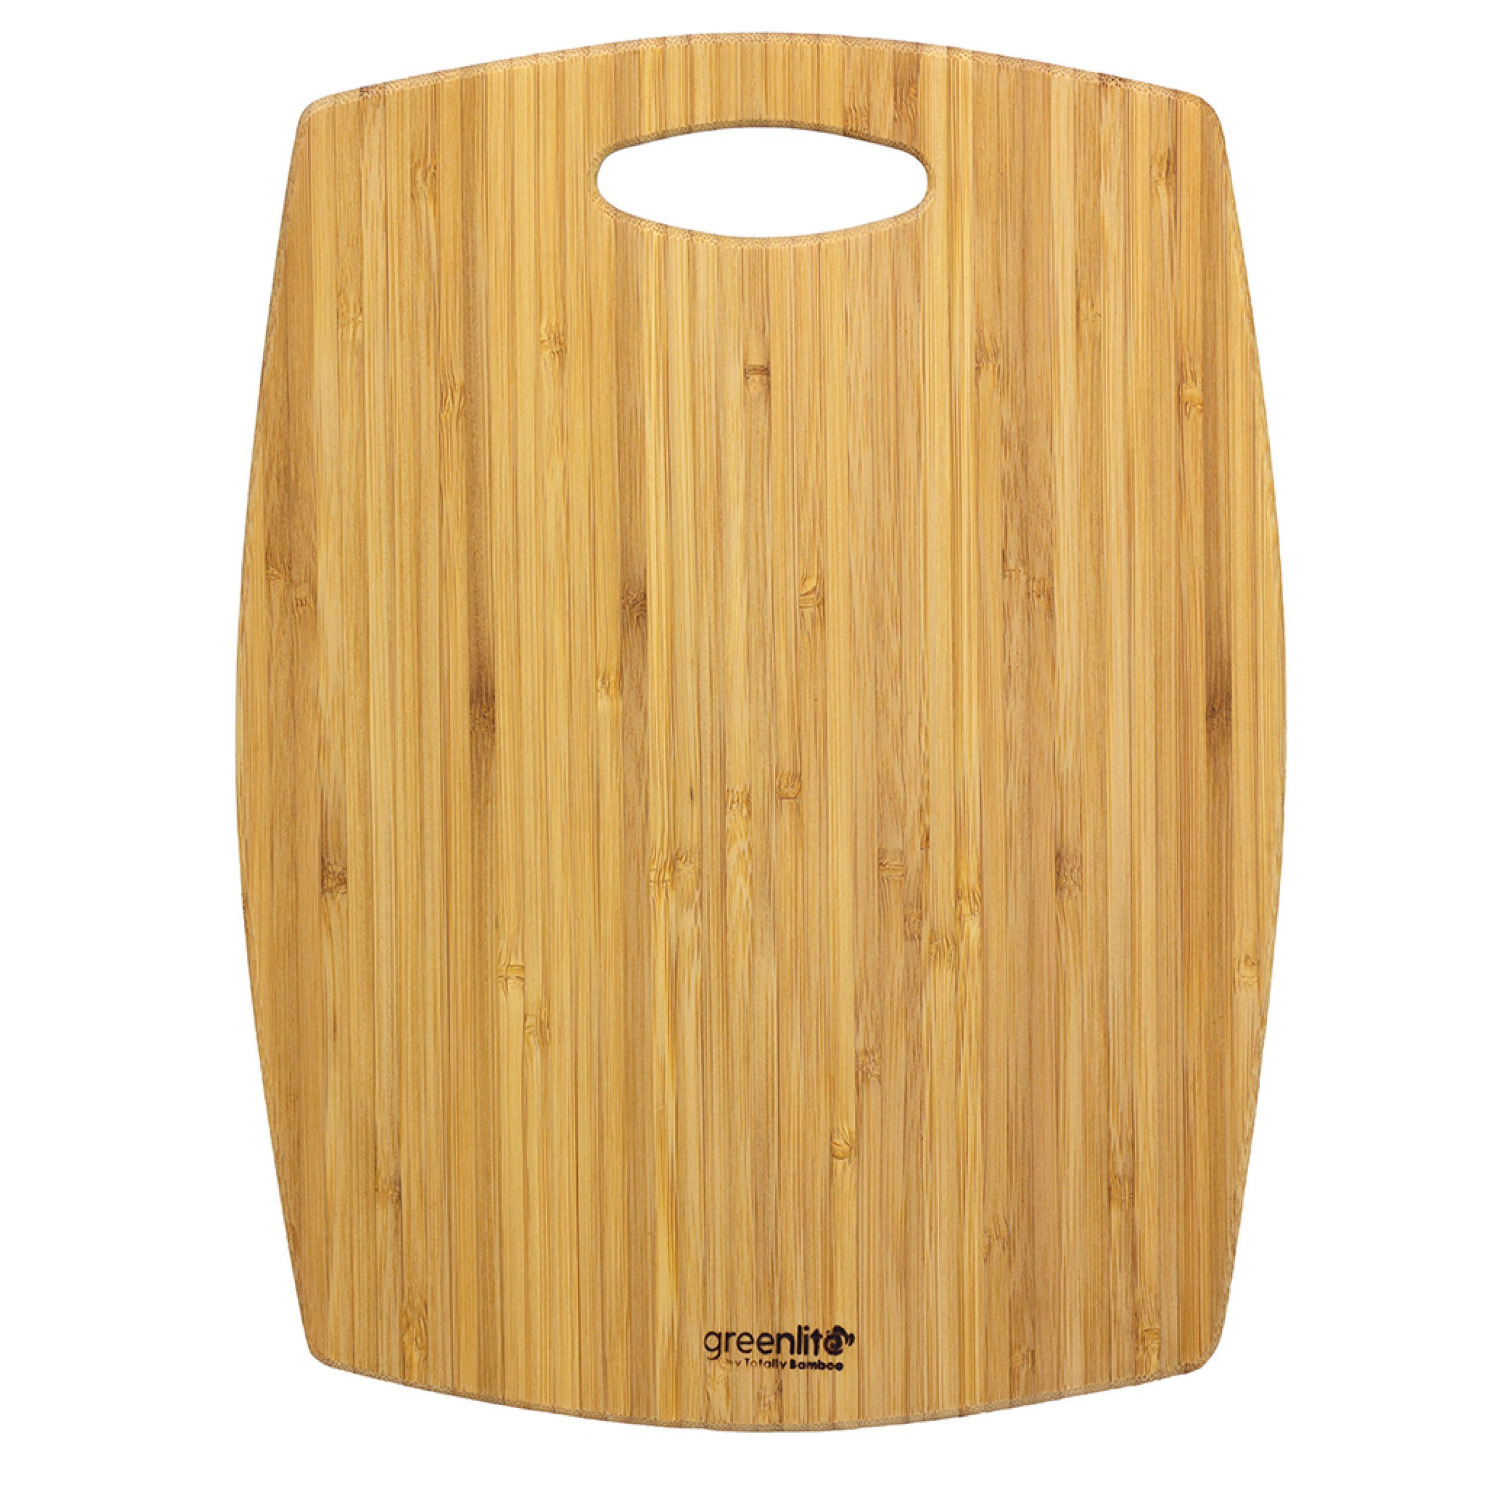 Totally Bamboo 12" Greenlite Dishwasher Safe Cutting Board - image 2 of 5